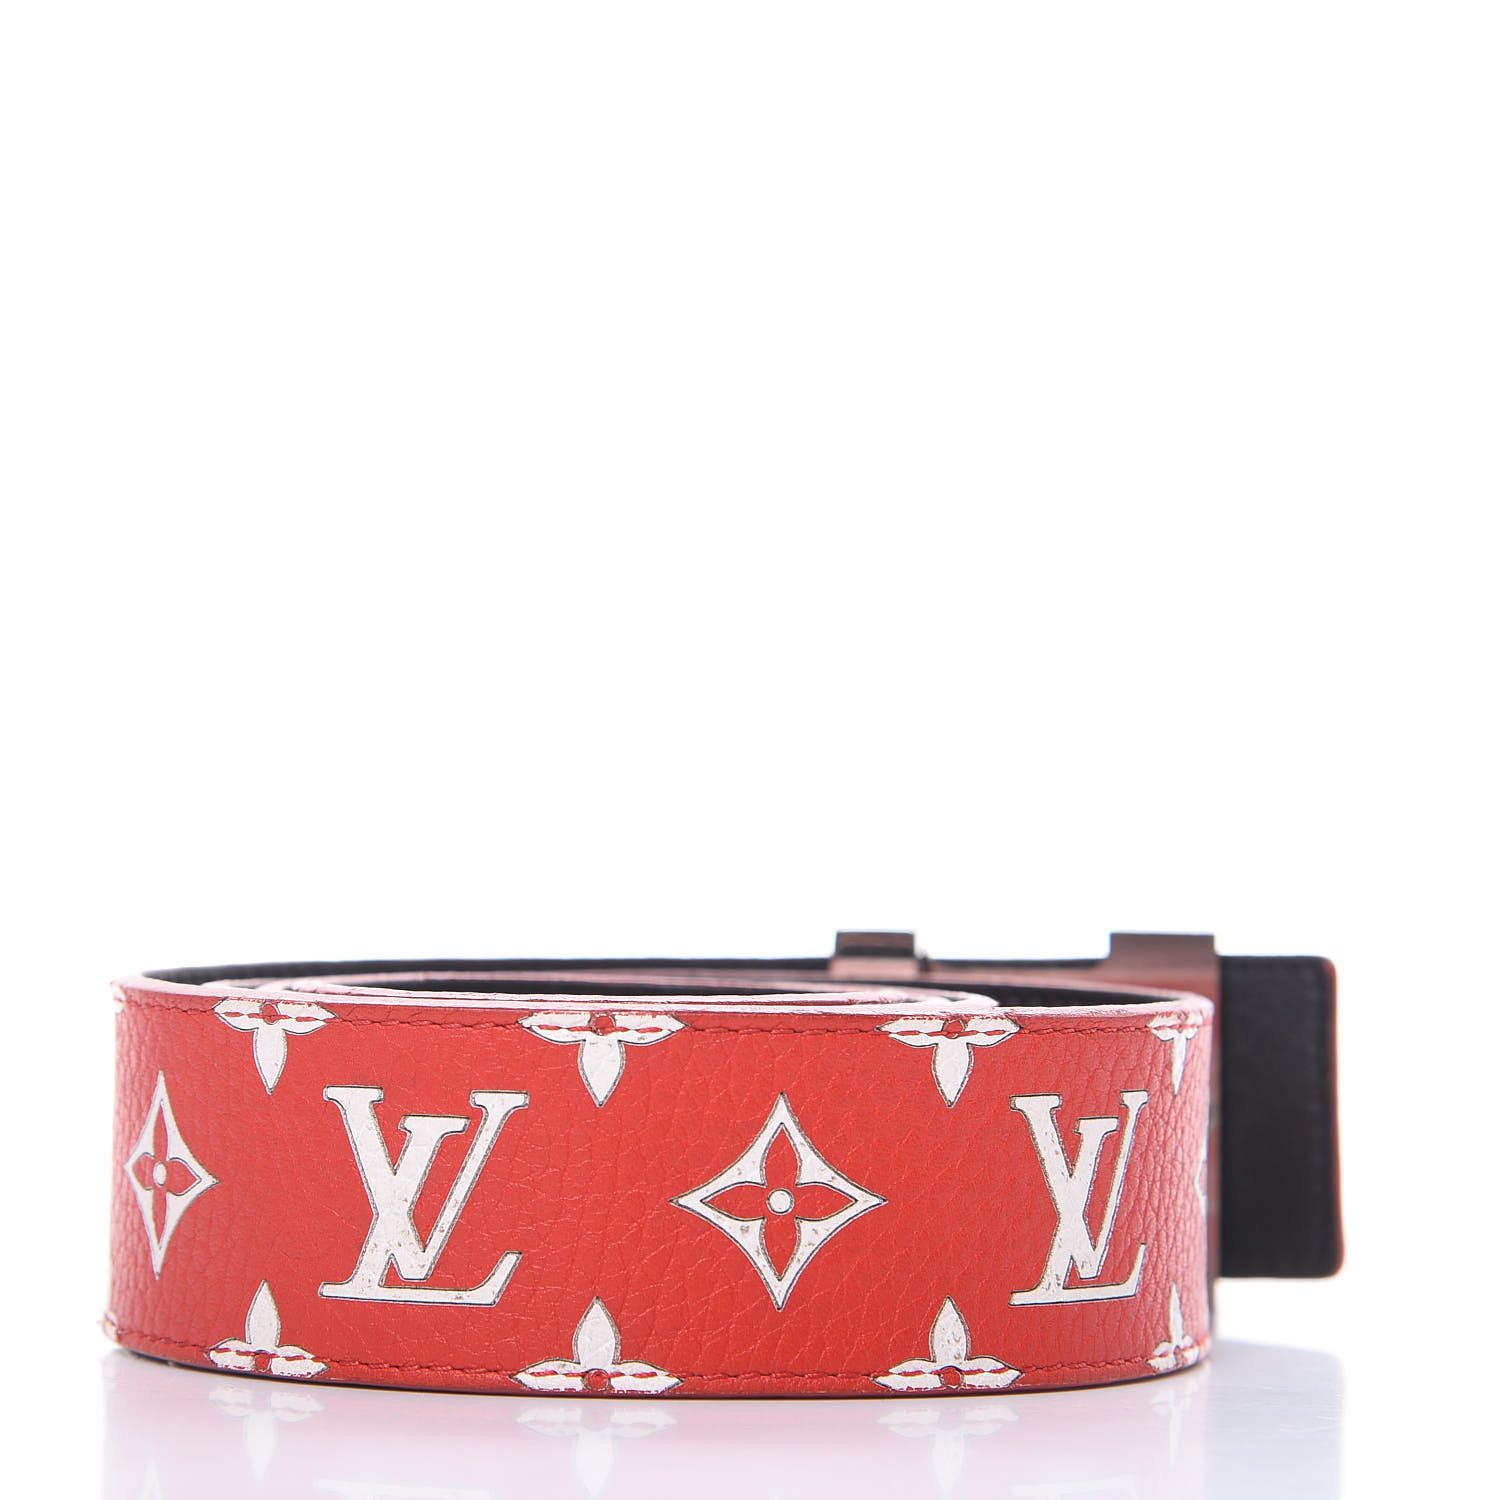 Preowned Louis Vuitton X Supreme Red Belt Sz 95 New With Tags/box ($1,960)  ❤ liked on Polyvore fea…